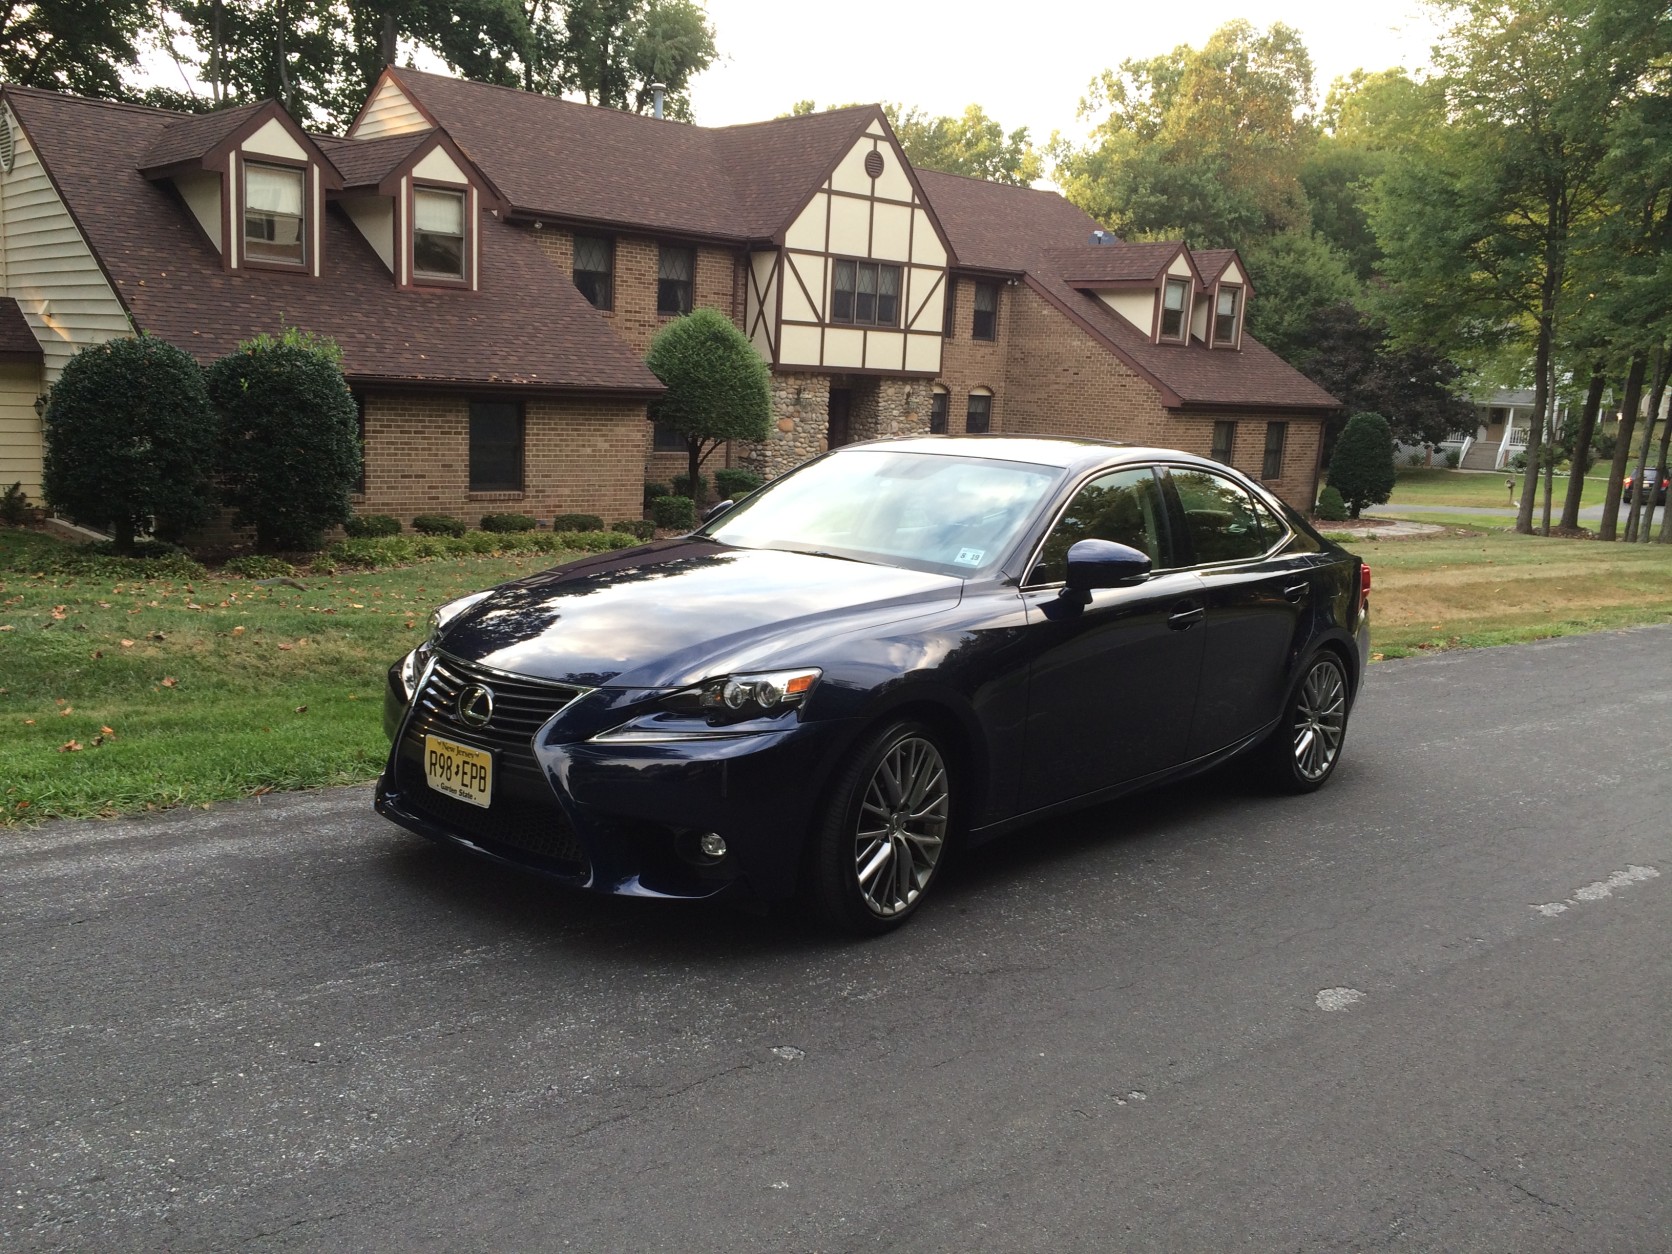 The IS250 is pretty sporty for Lexus with its bold looks and smaller size.  (WTOP/Mike Parris)